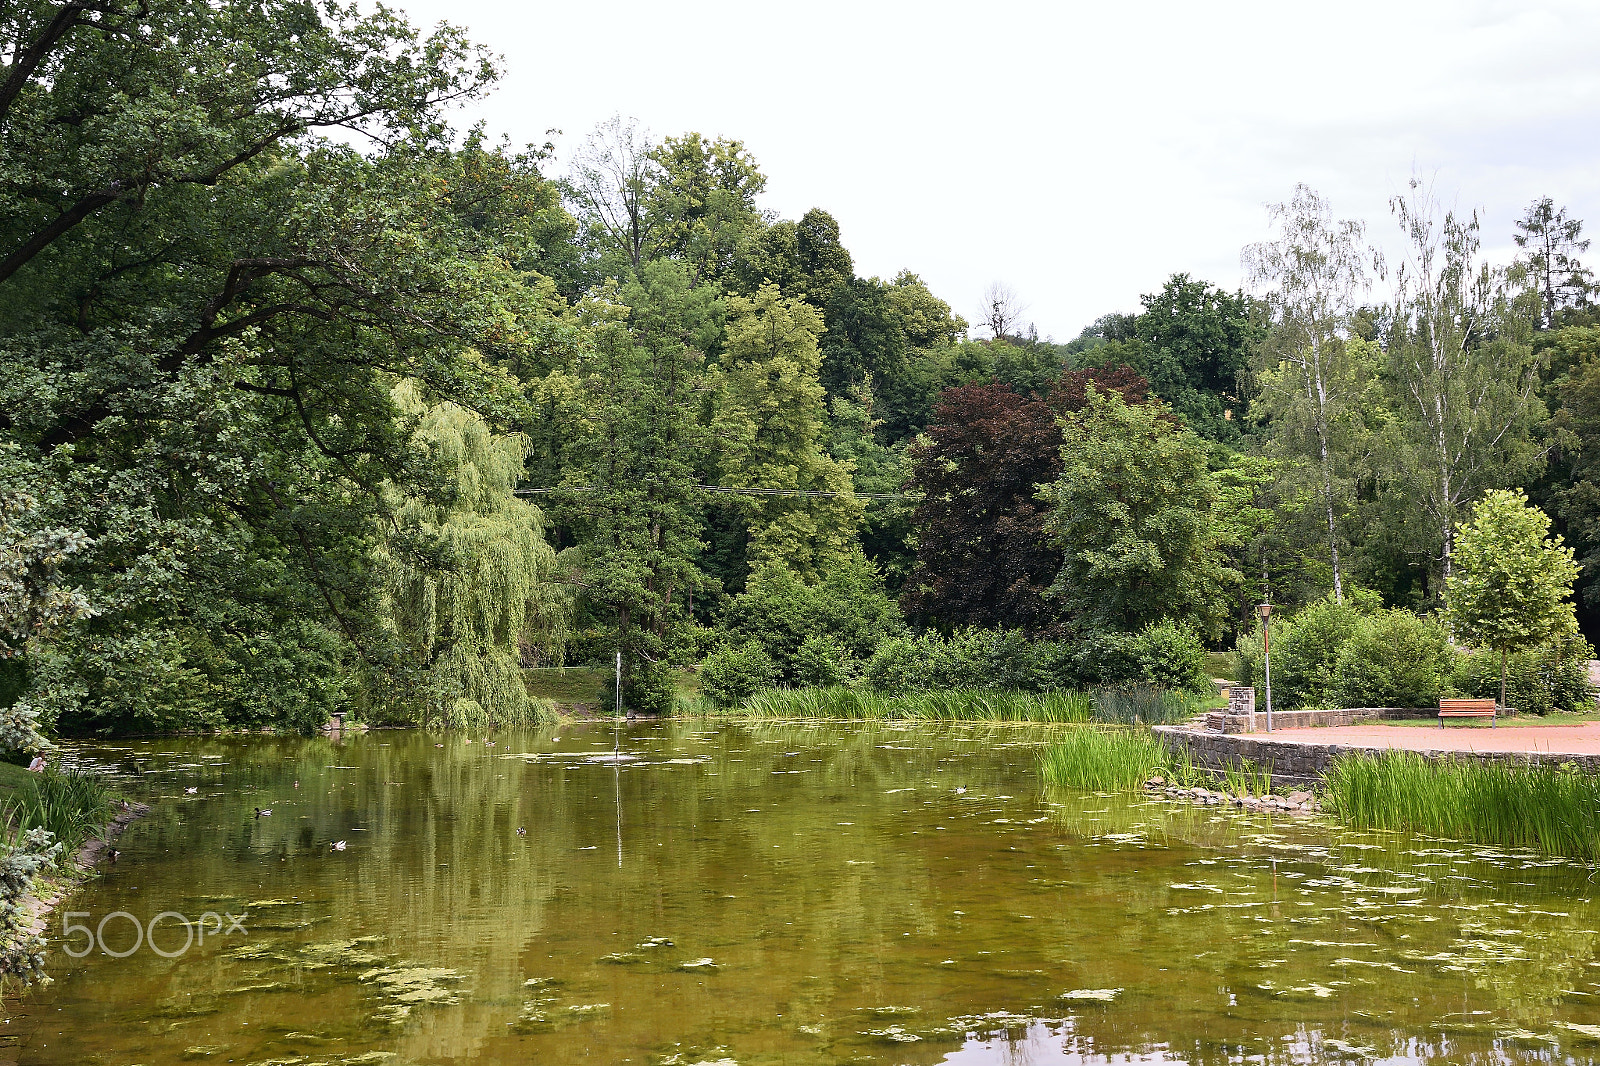 Nikon D5300 sample photo. Lake and trees in panska zahrada garden in vsetin city during cloudy weather photography